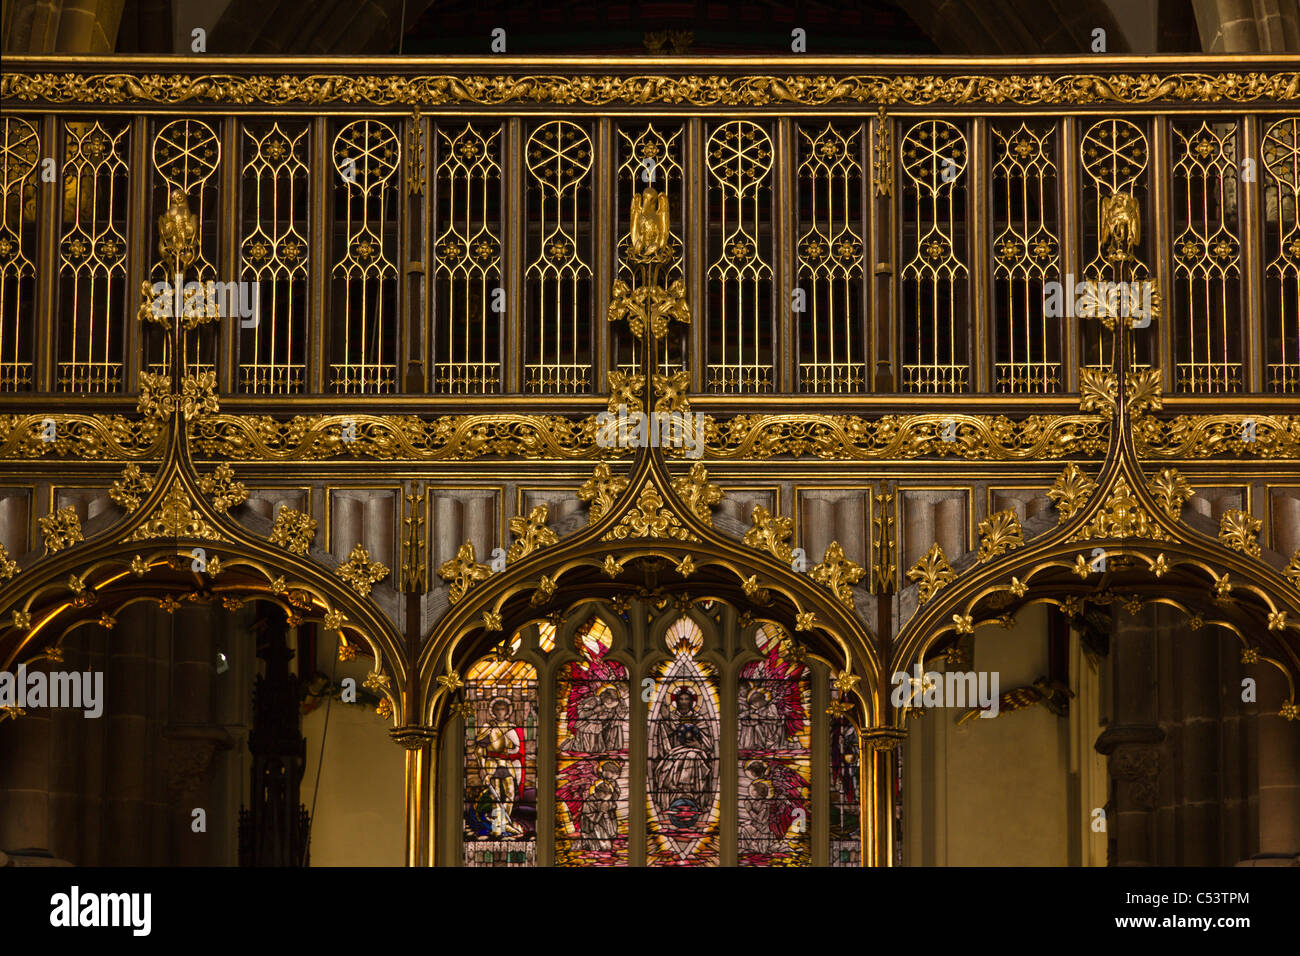 Ornate carved and gold gilded wooden chancel screen, Leicester Cathedral, Leicester, England, UK Stock Photo